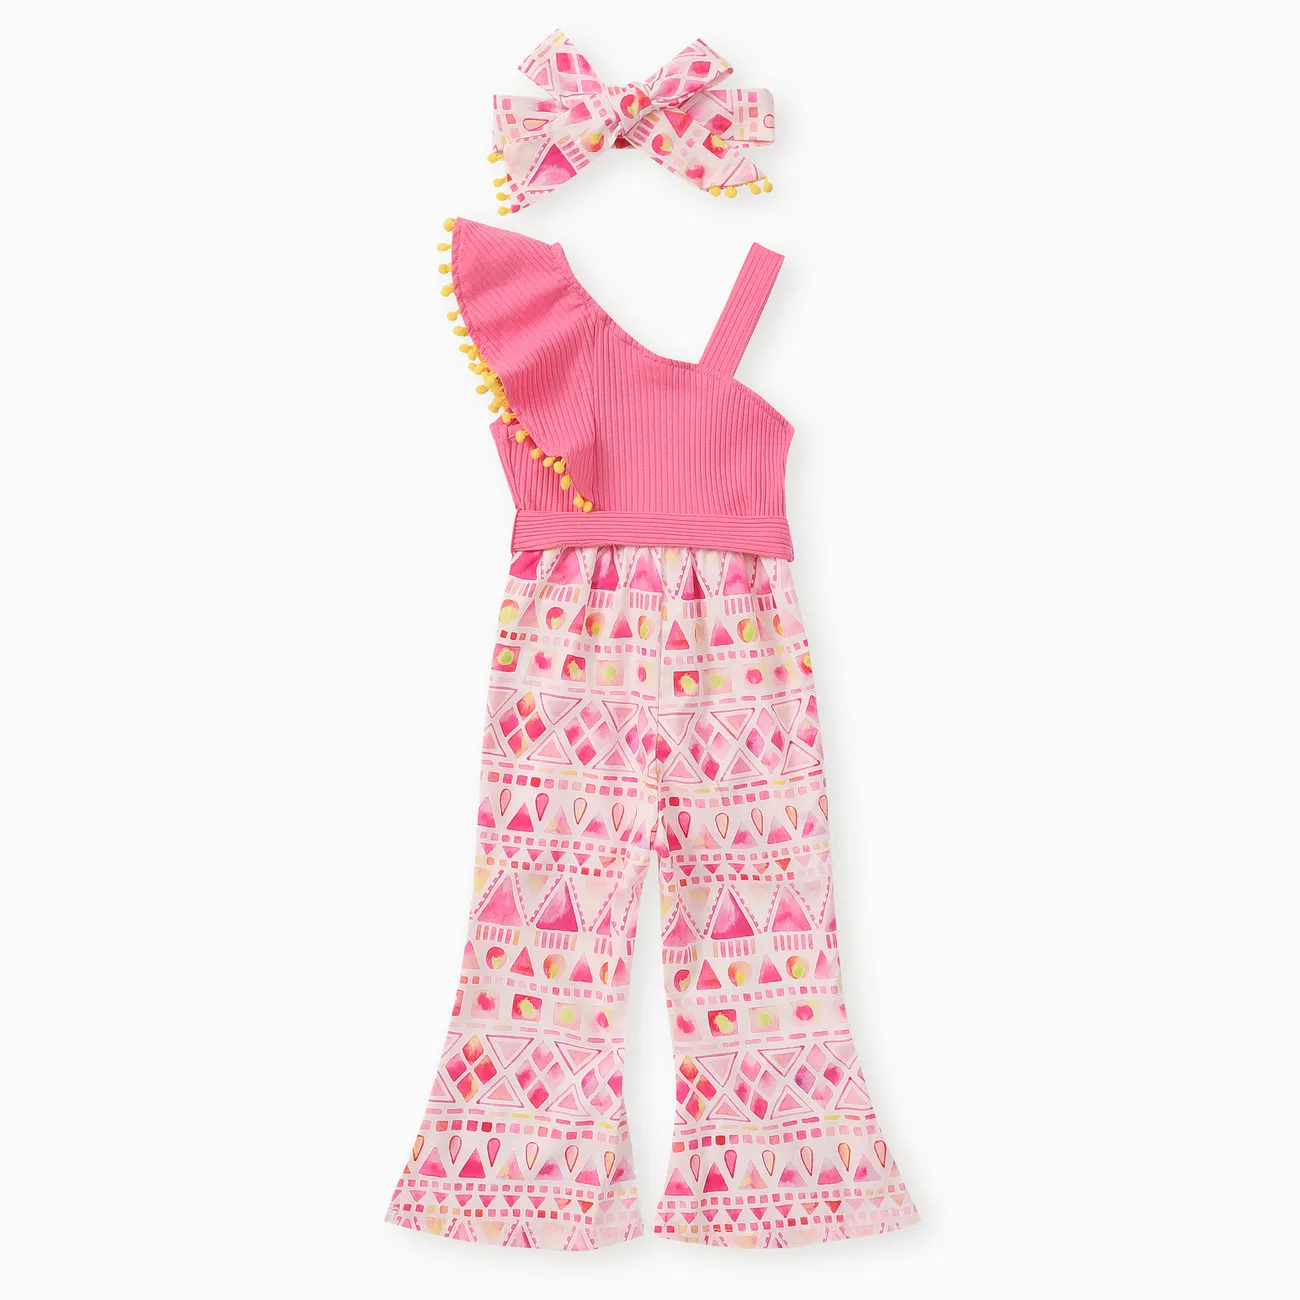 Toddler Girl 2cps Sweet Colorblock Geometric Pattern Jumpsuit and Headband Set Pink big image 1